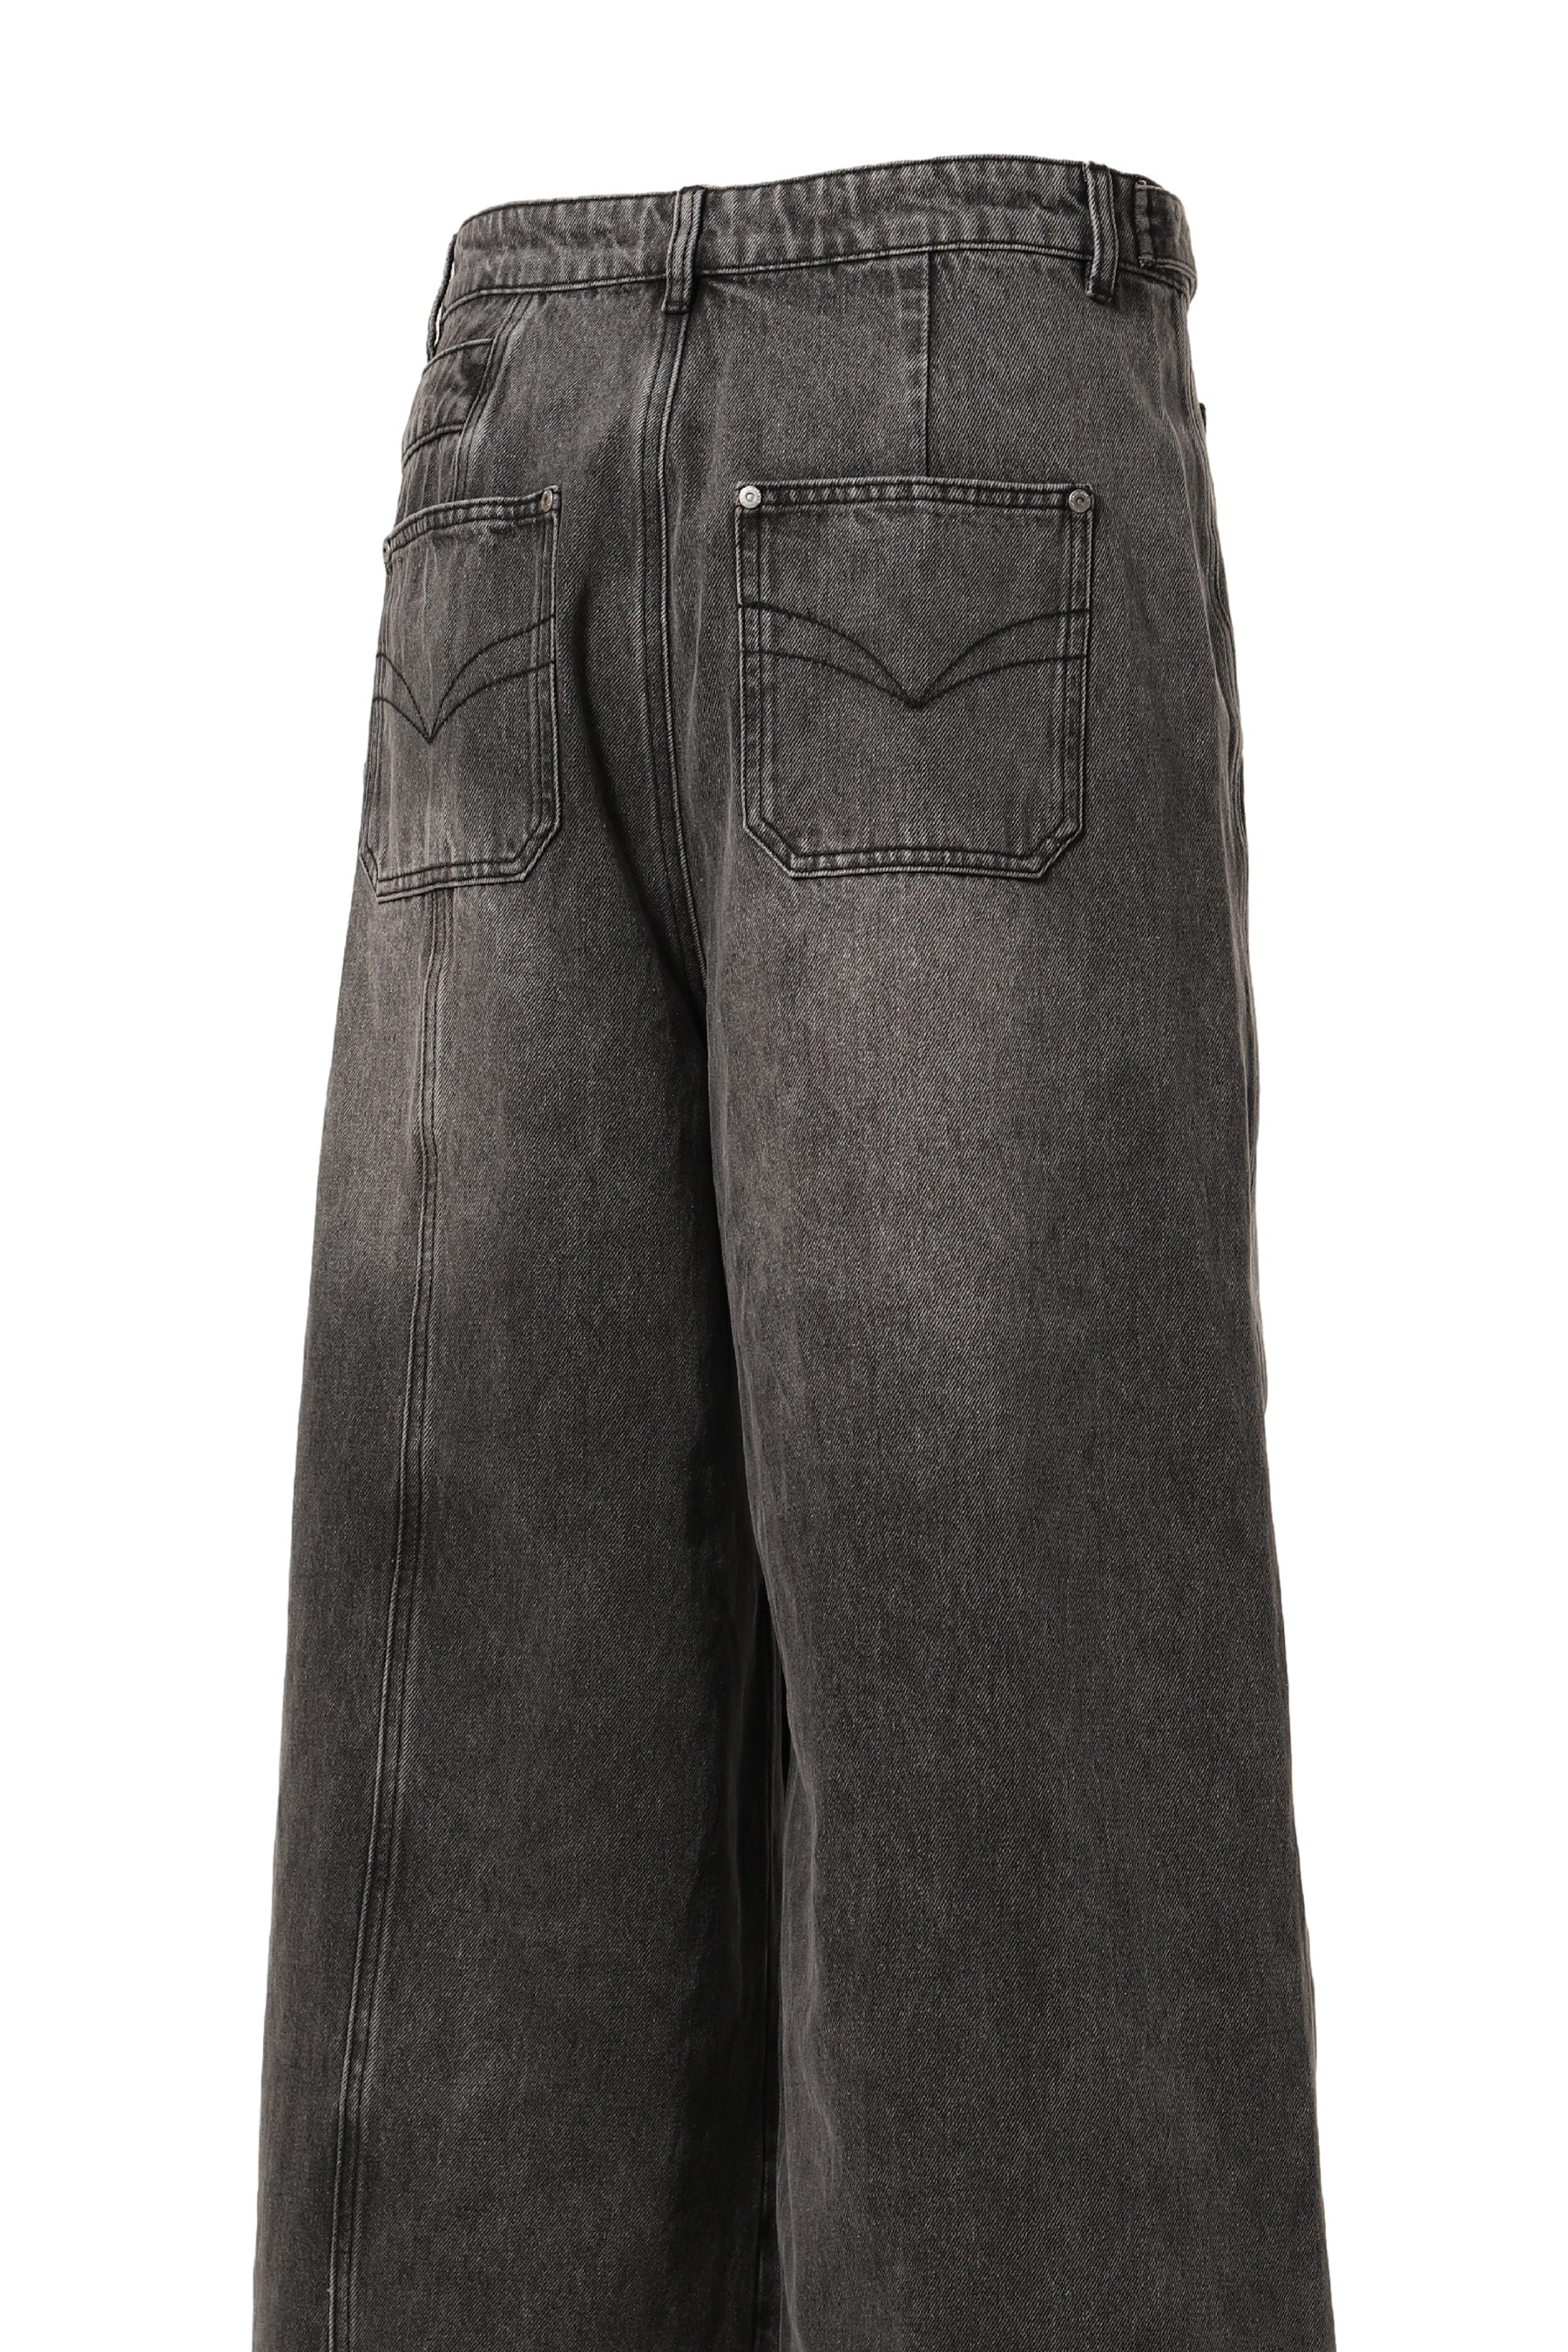 ASYMETRIC WIDE LEG JEANS WITH PANEL REMAKE / BLK